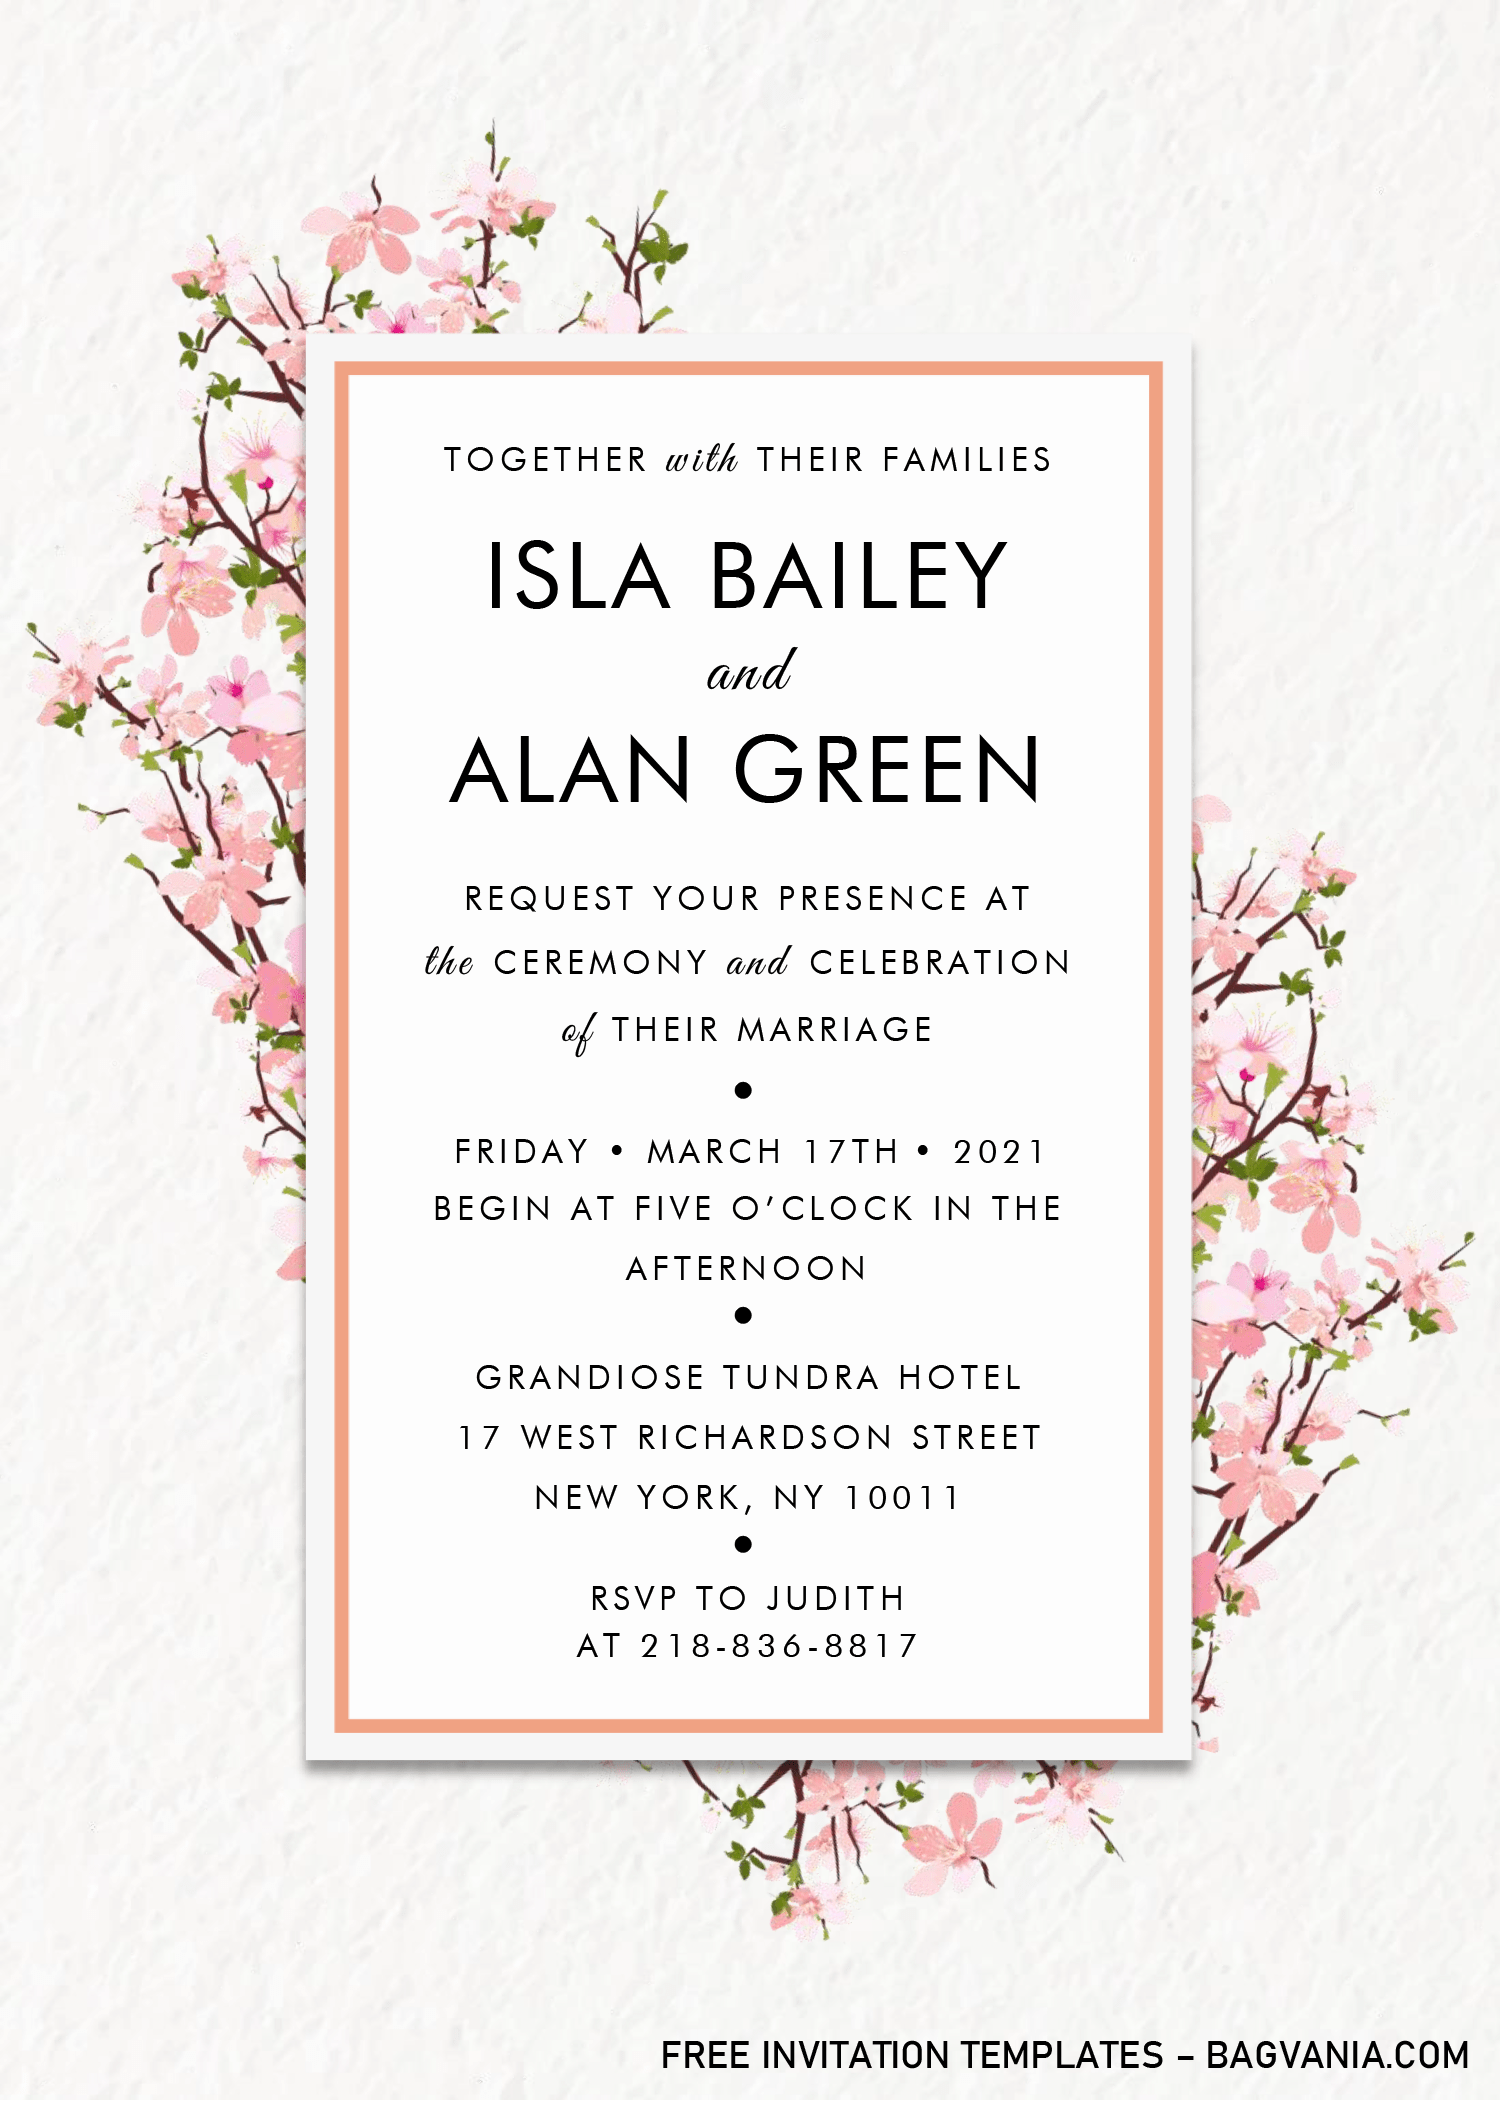 Modern Floral Invitation Templates – Editable With MS Word | FREE